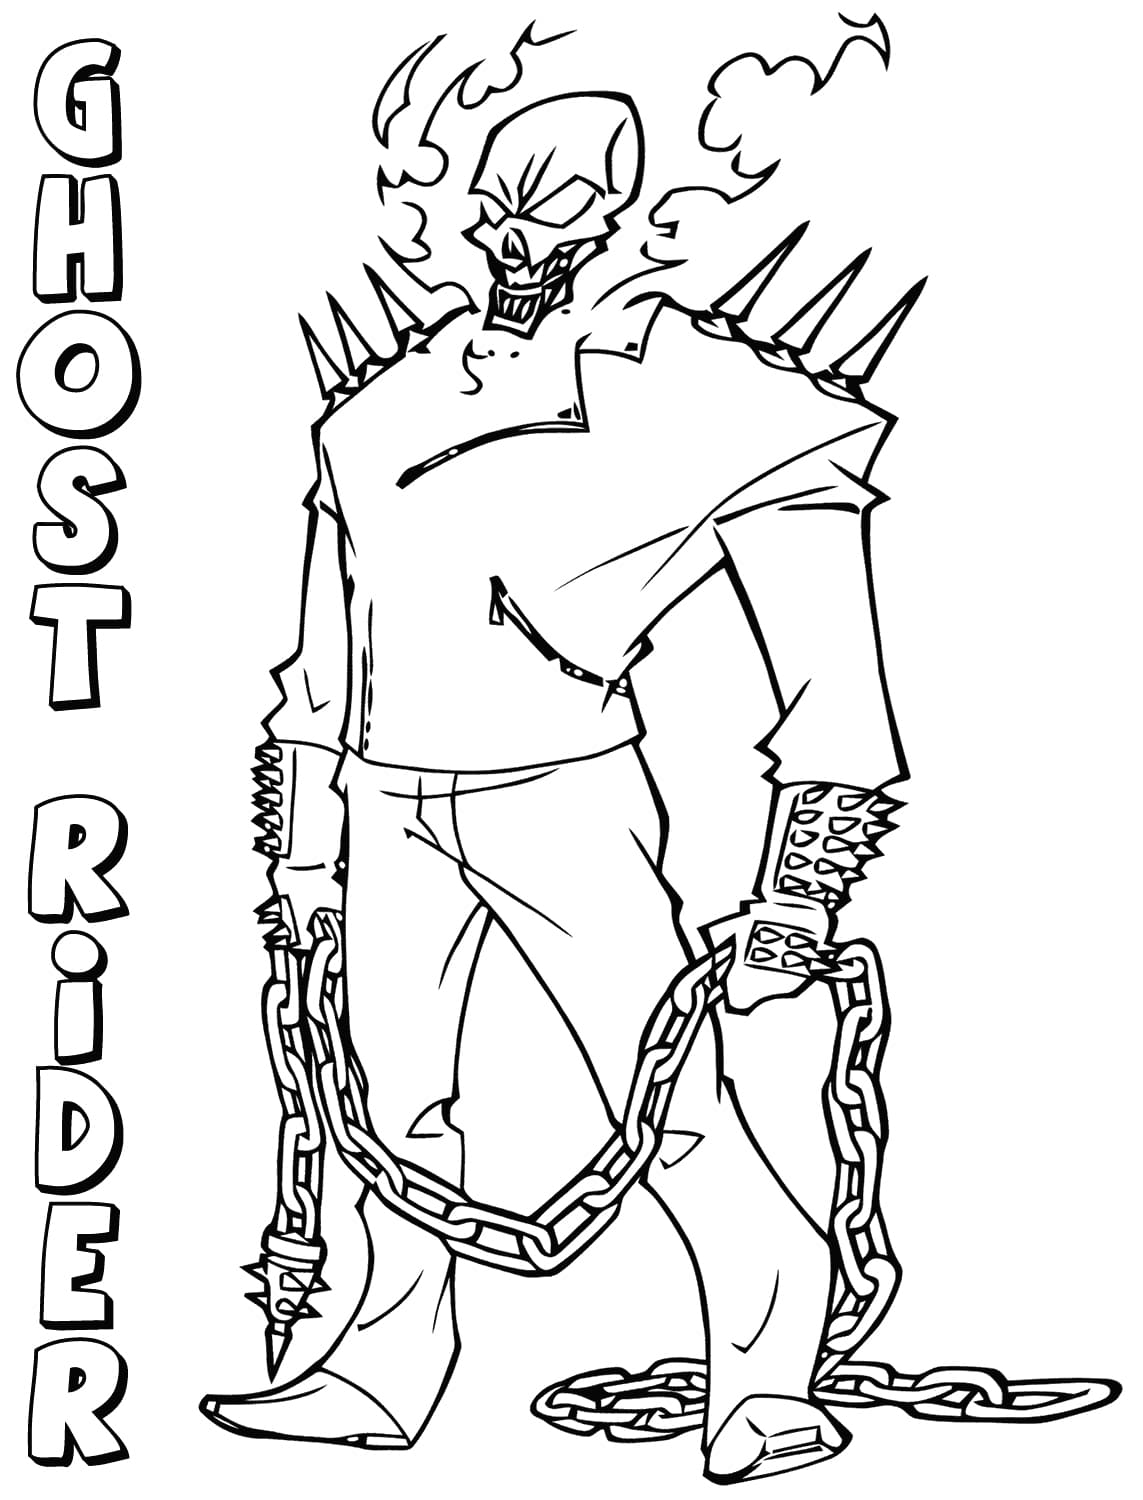 Ghost Rider Coloring Pages | WONDER DAY — Coloring pages for children and  adults